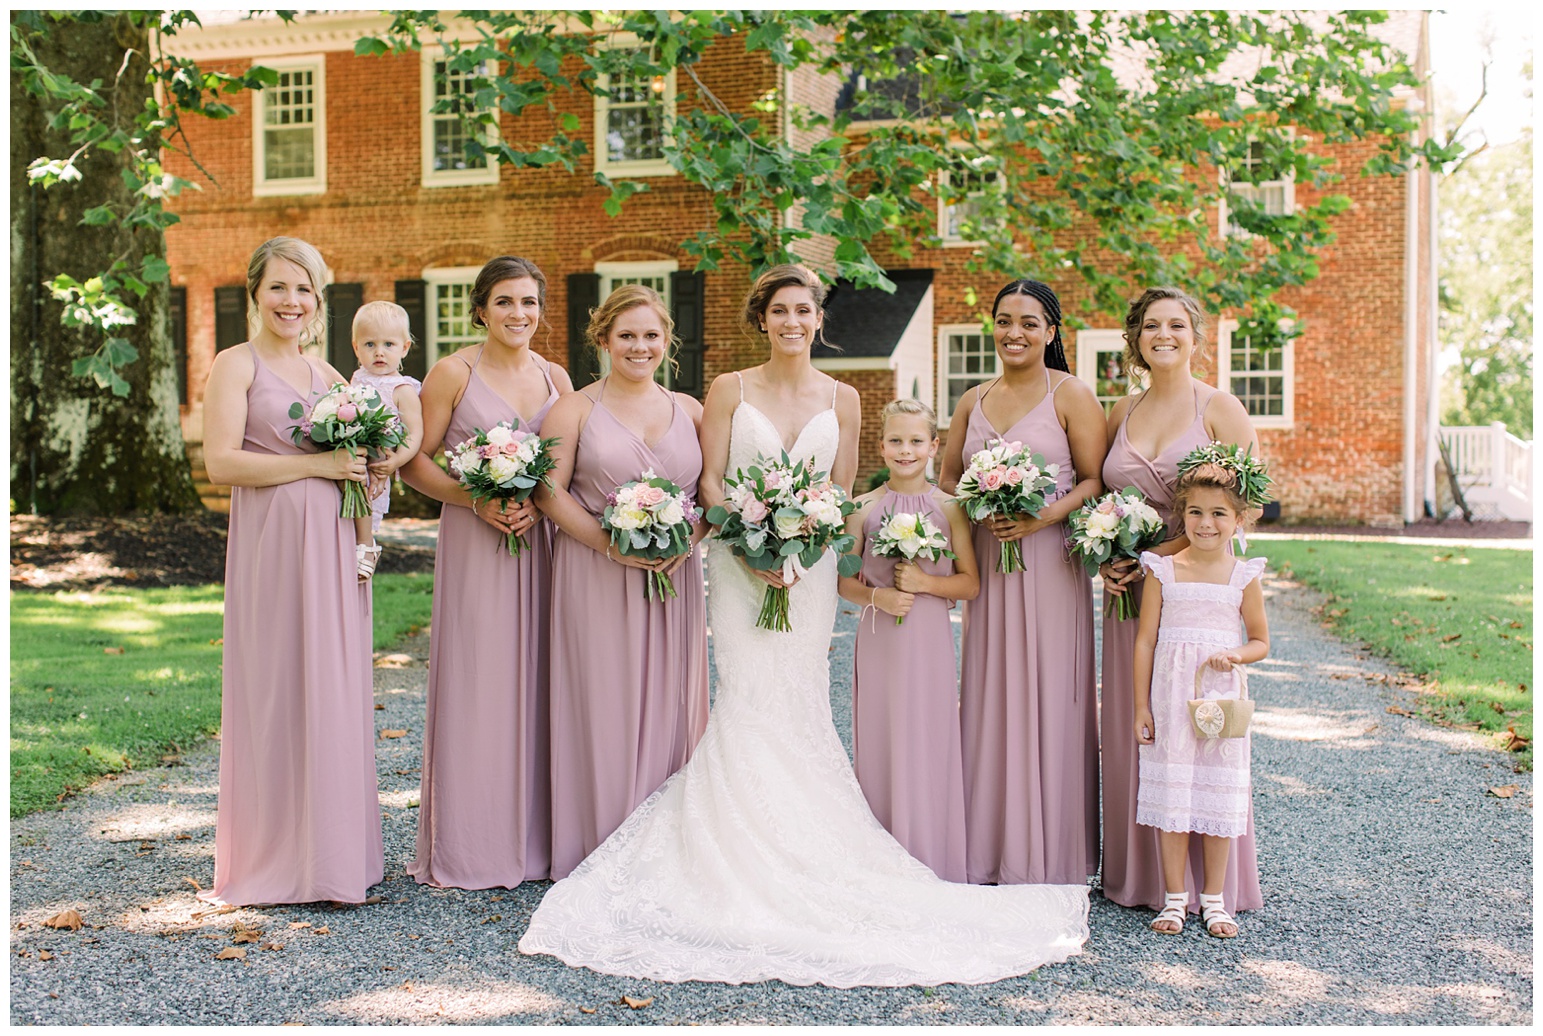 worsell manor wedding in the summer - warwick md - now featured on My Eastern Shore Wedding - coastal - sea - nautical - eastern shore - inspired wedding ideas and inspo - photo of bride bridesmaids and flower girl outdoors in front of brick manor style building